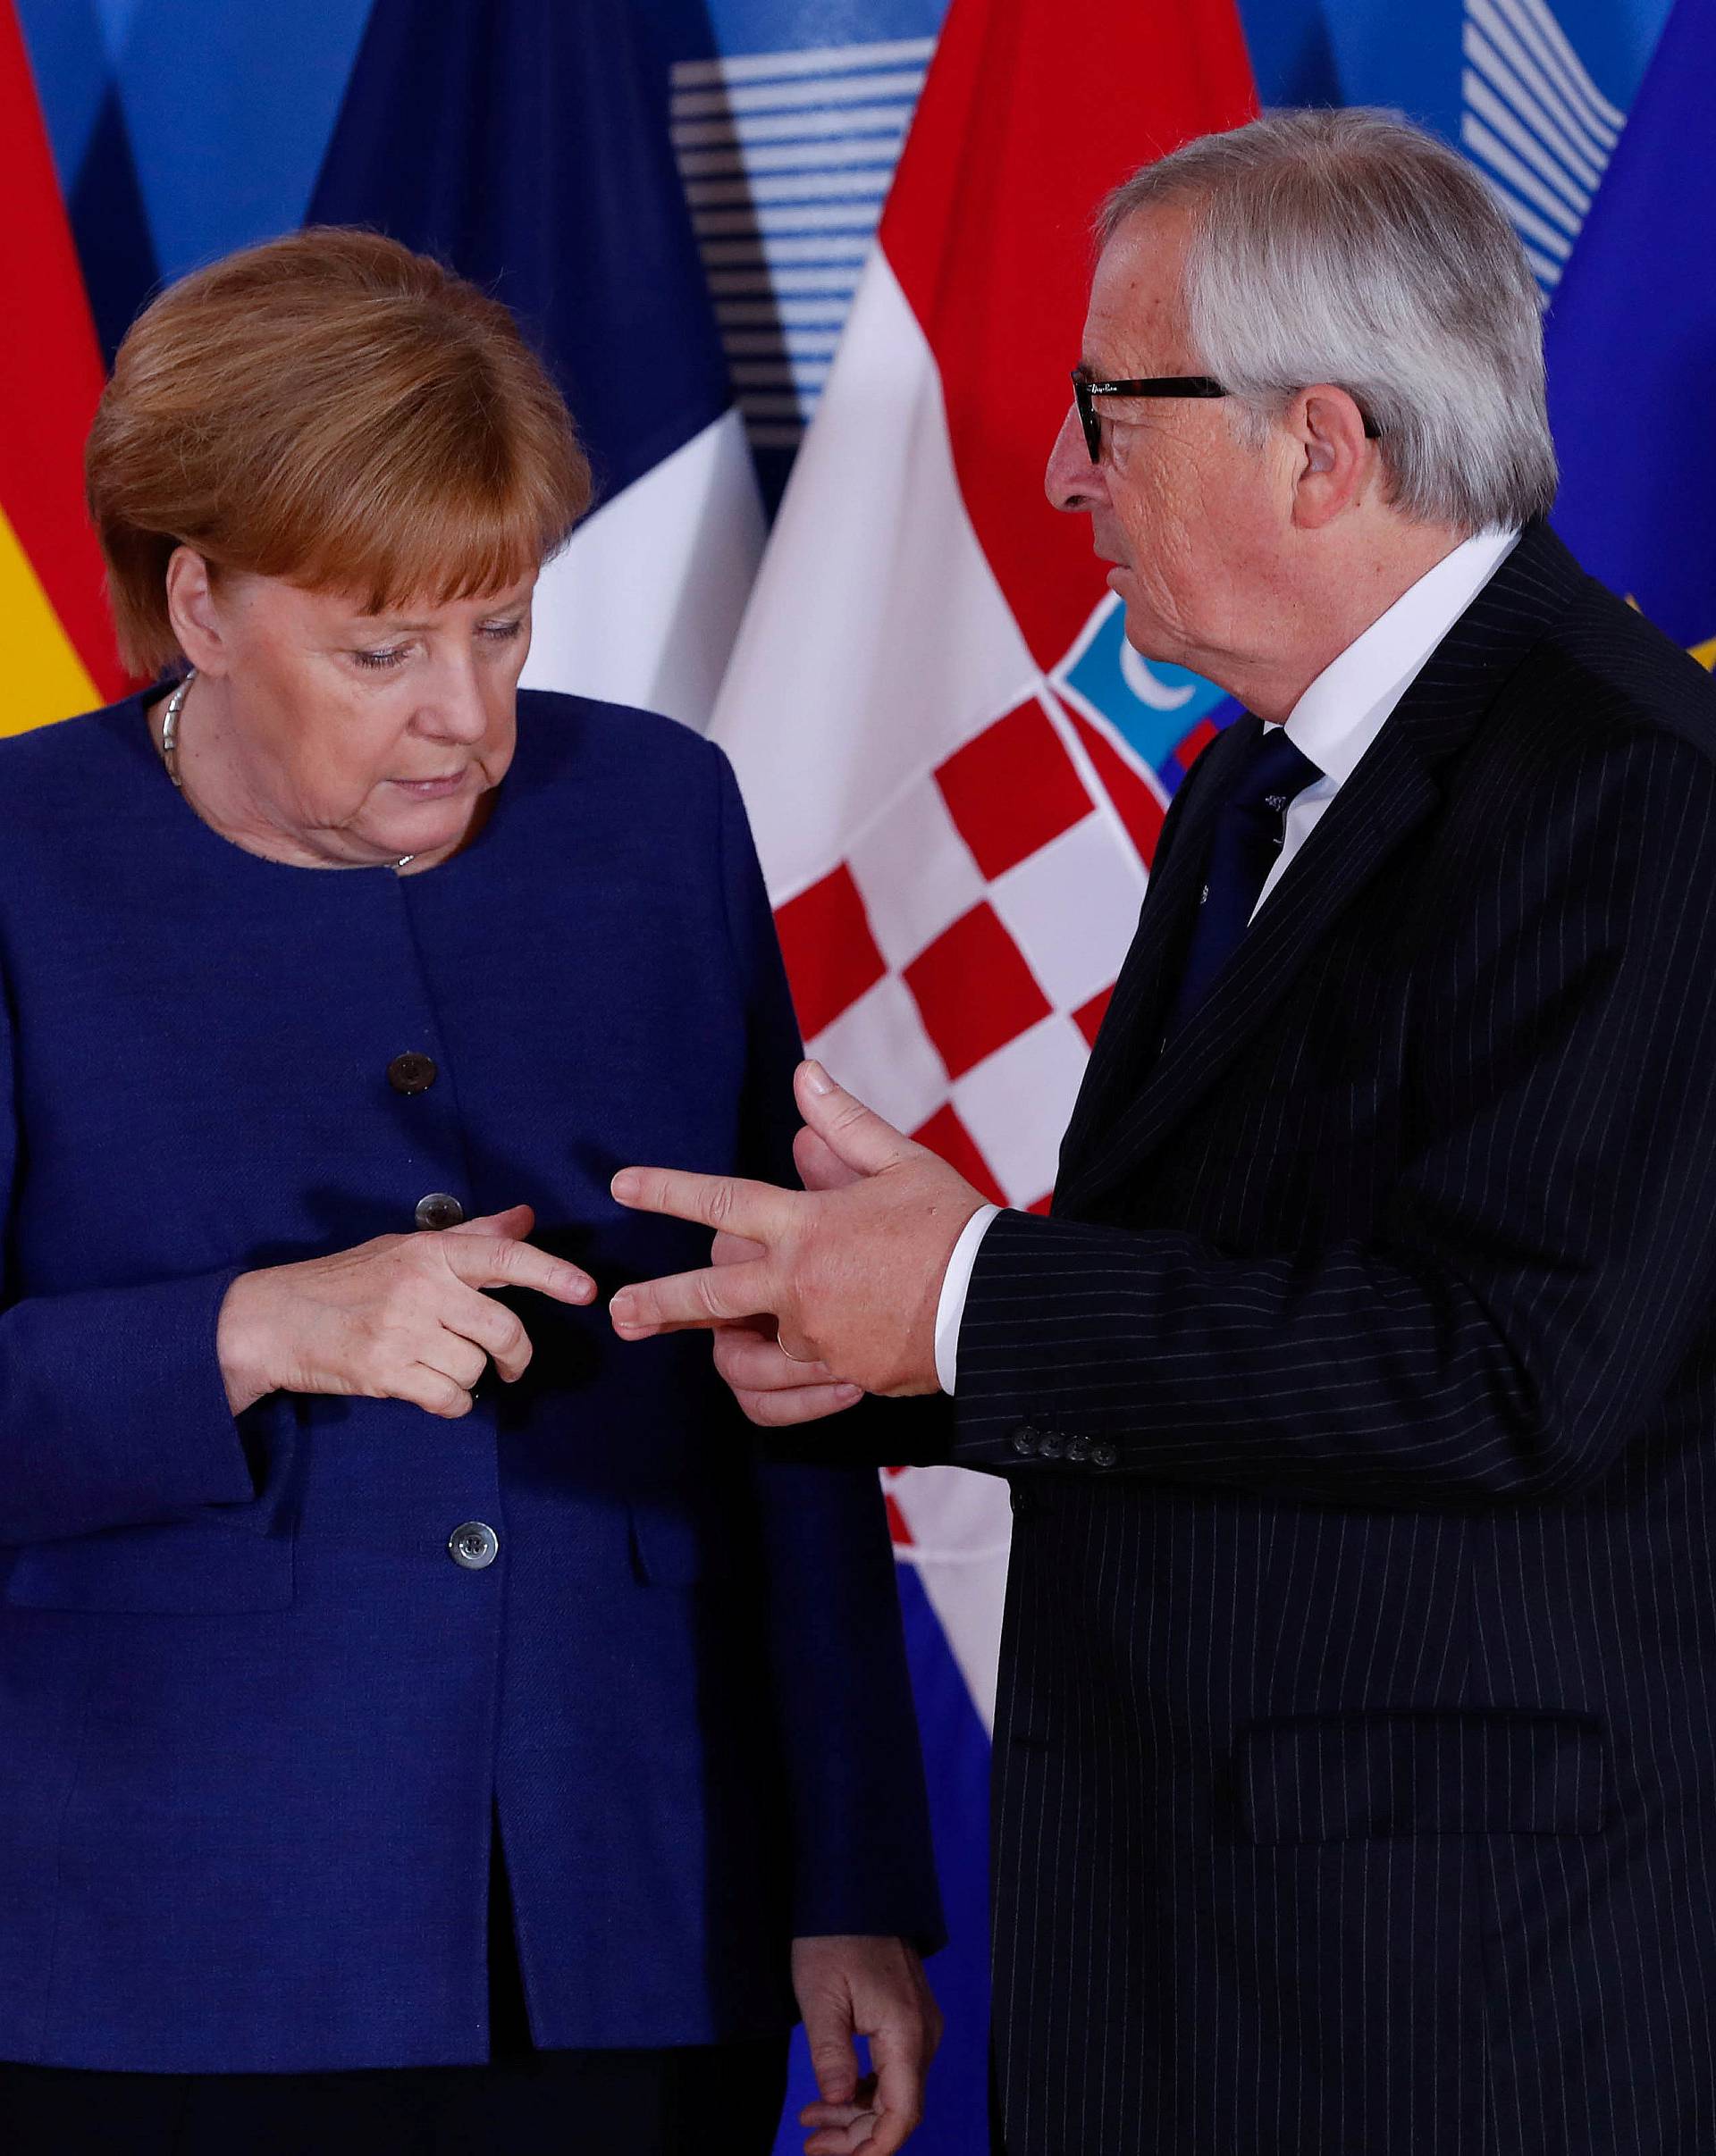 German Chancellor Angela Merkel is welcomed by European Commission President Jean-Claude Juncker at the start of an emergency European Union leaders summit on immigration at the EU Commission headquarters in Brussels